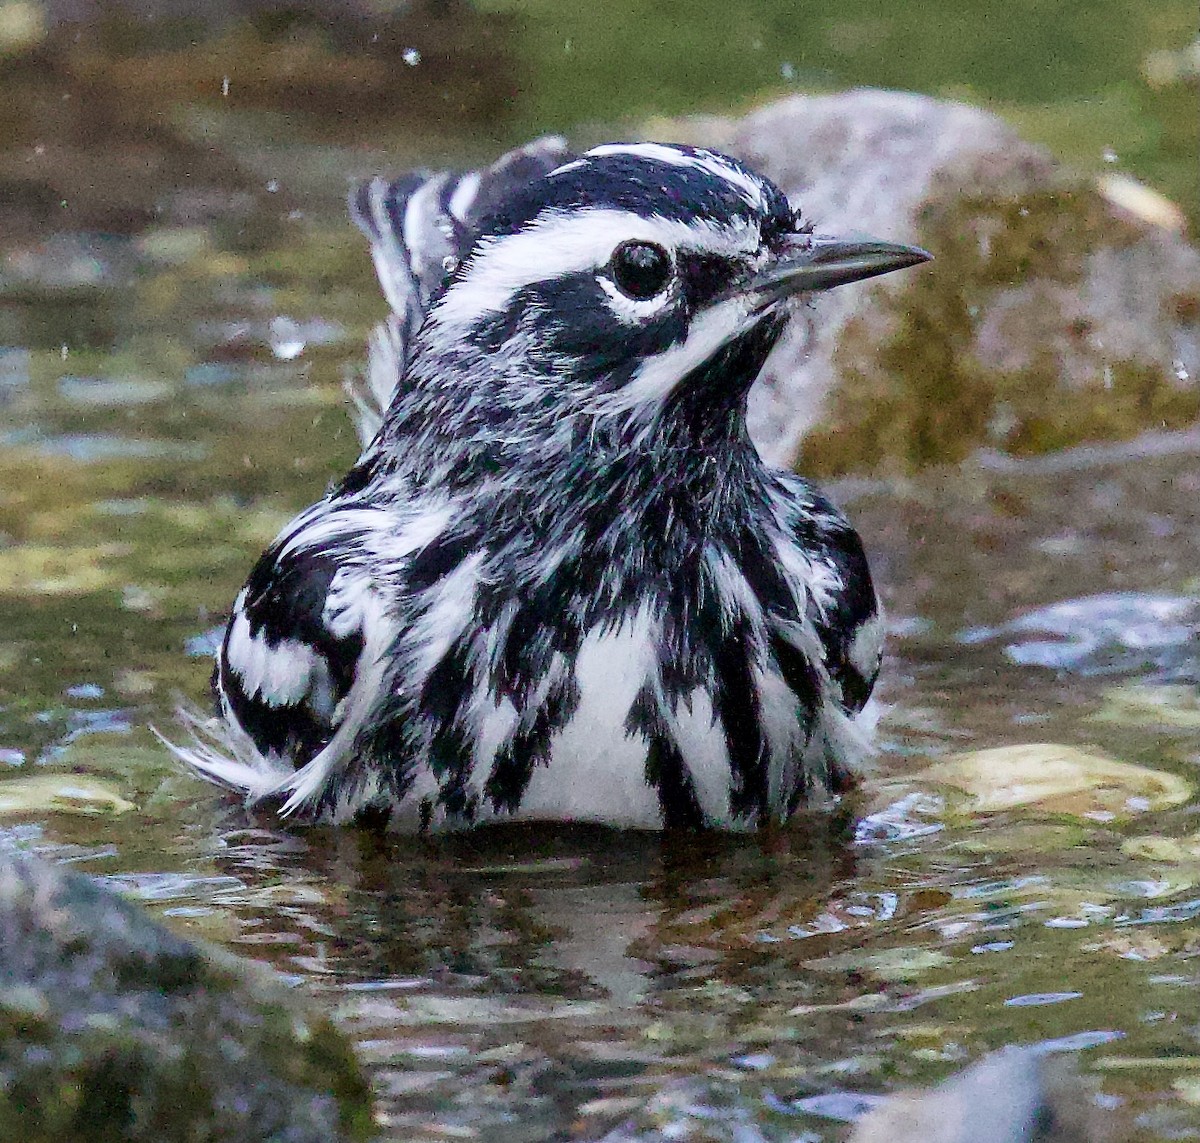 Black-and-white Warbler - Michael Yellin